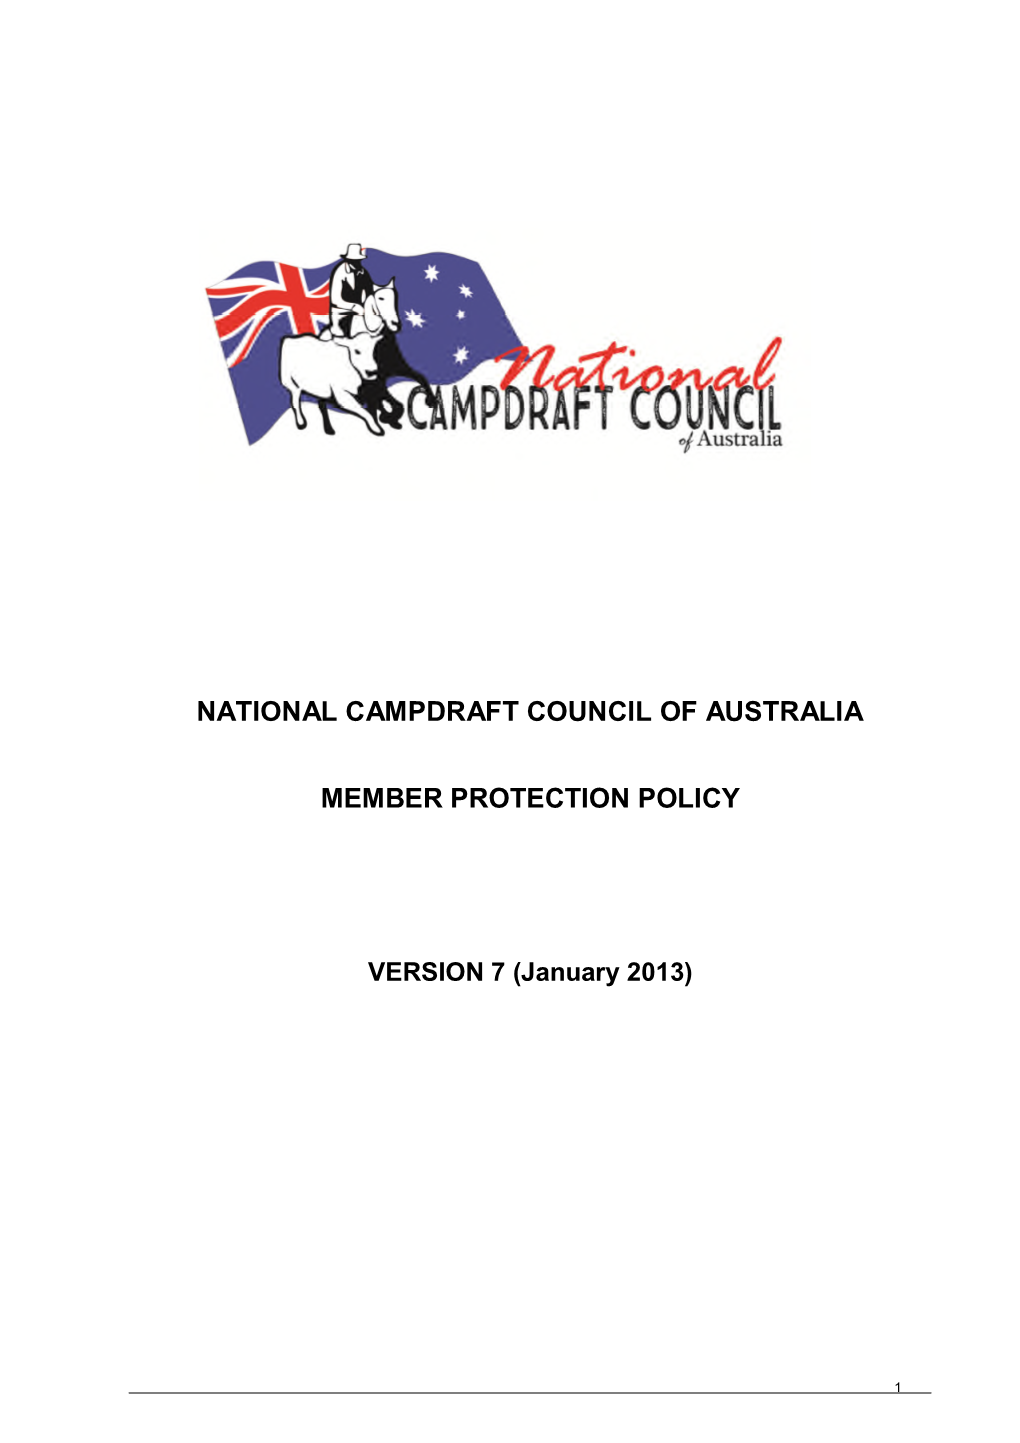 National Campdraft Council of Australia Member Protection Policy